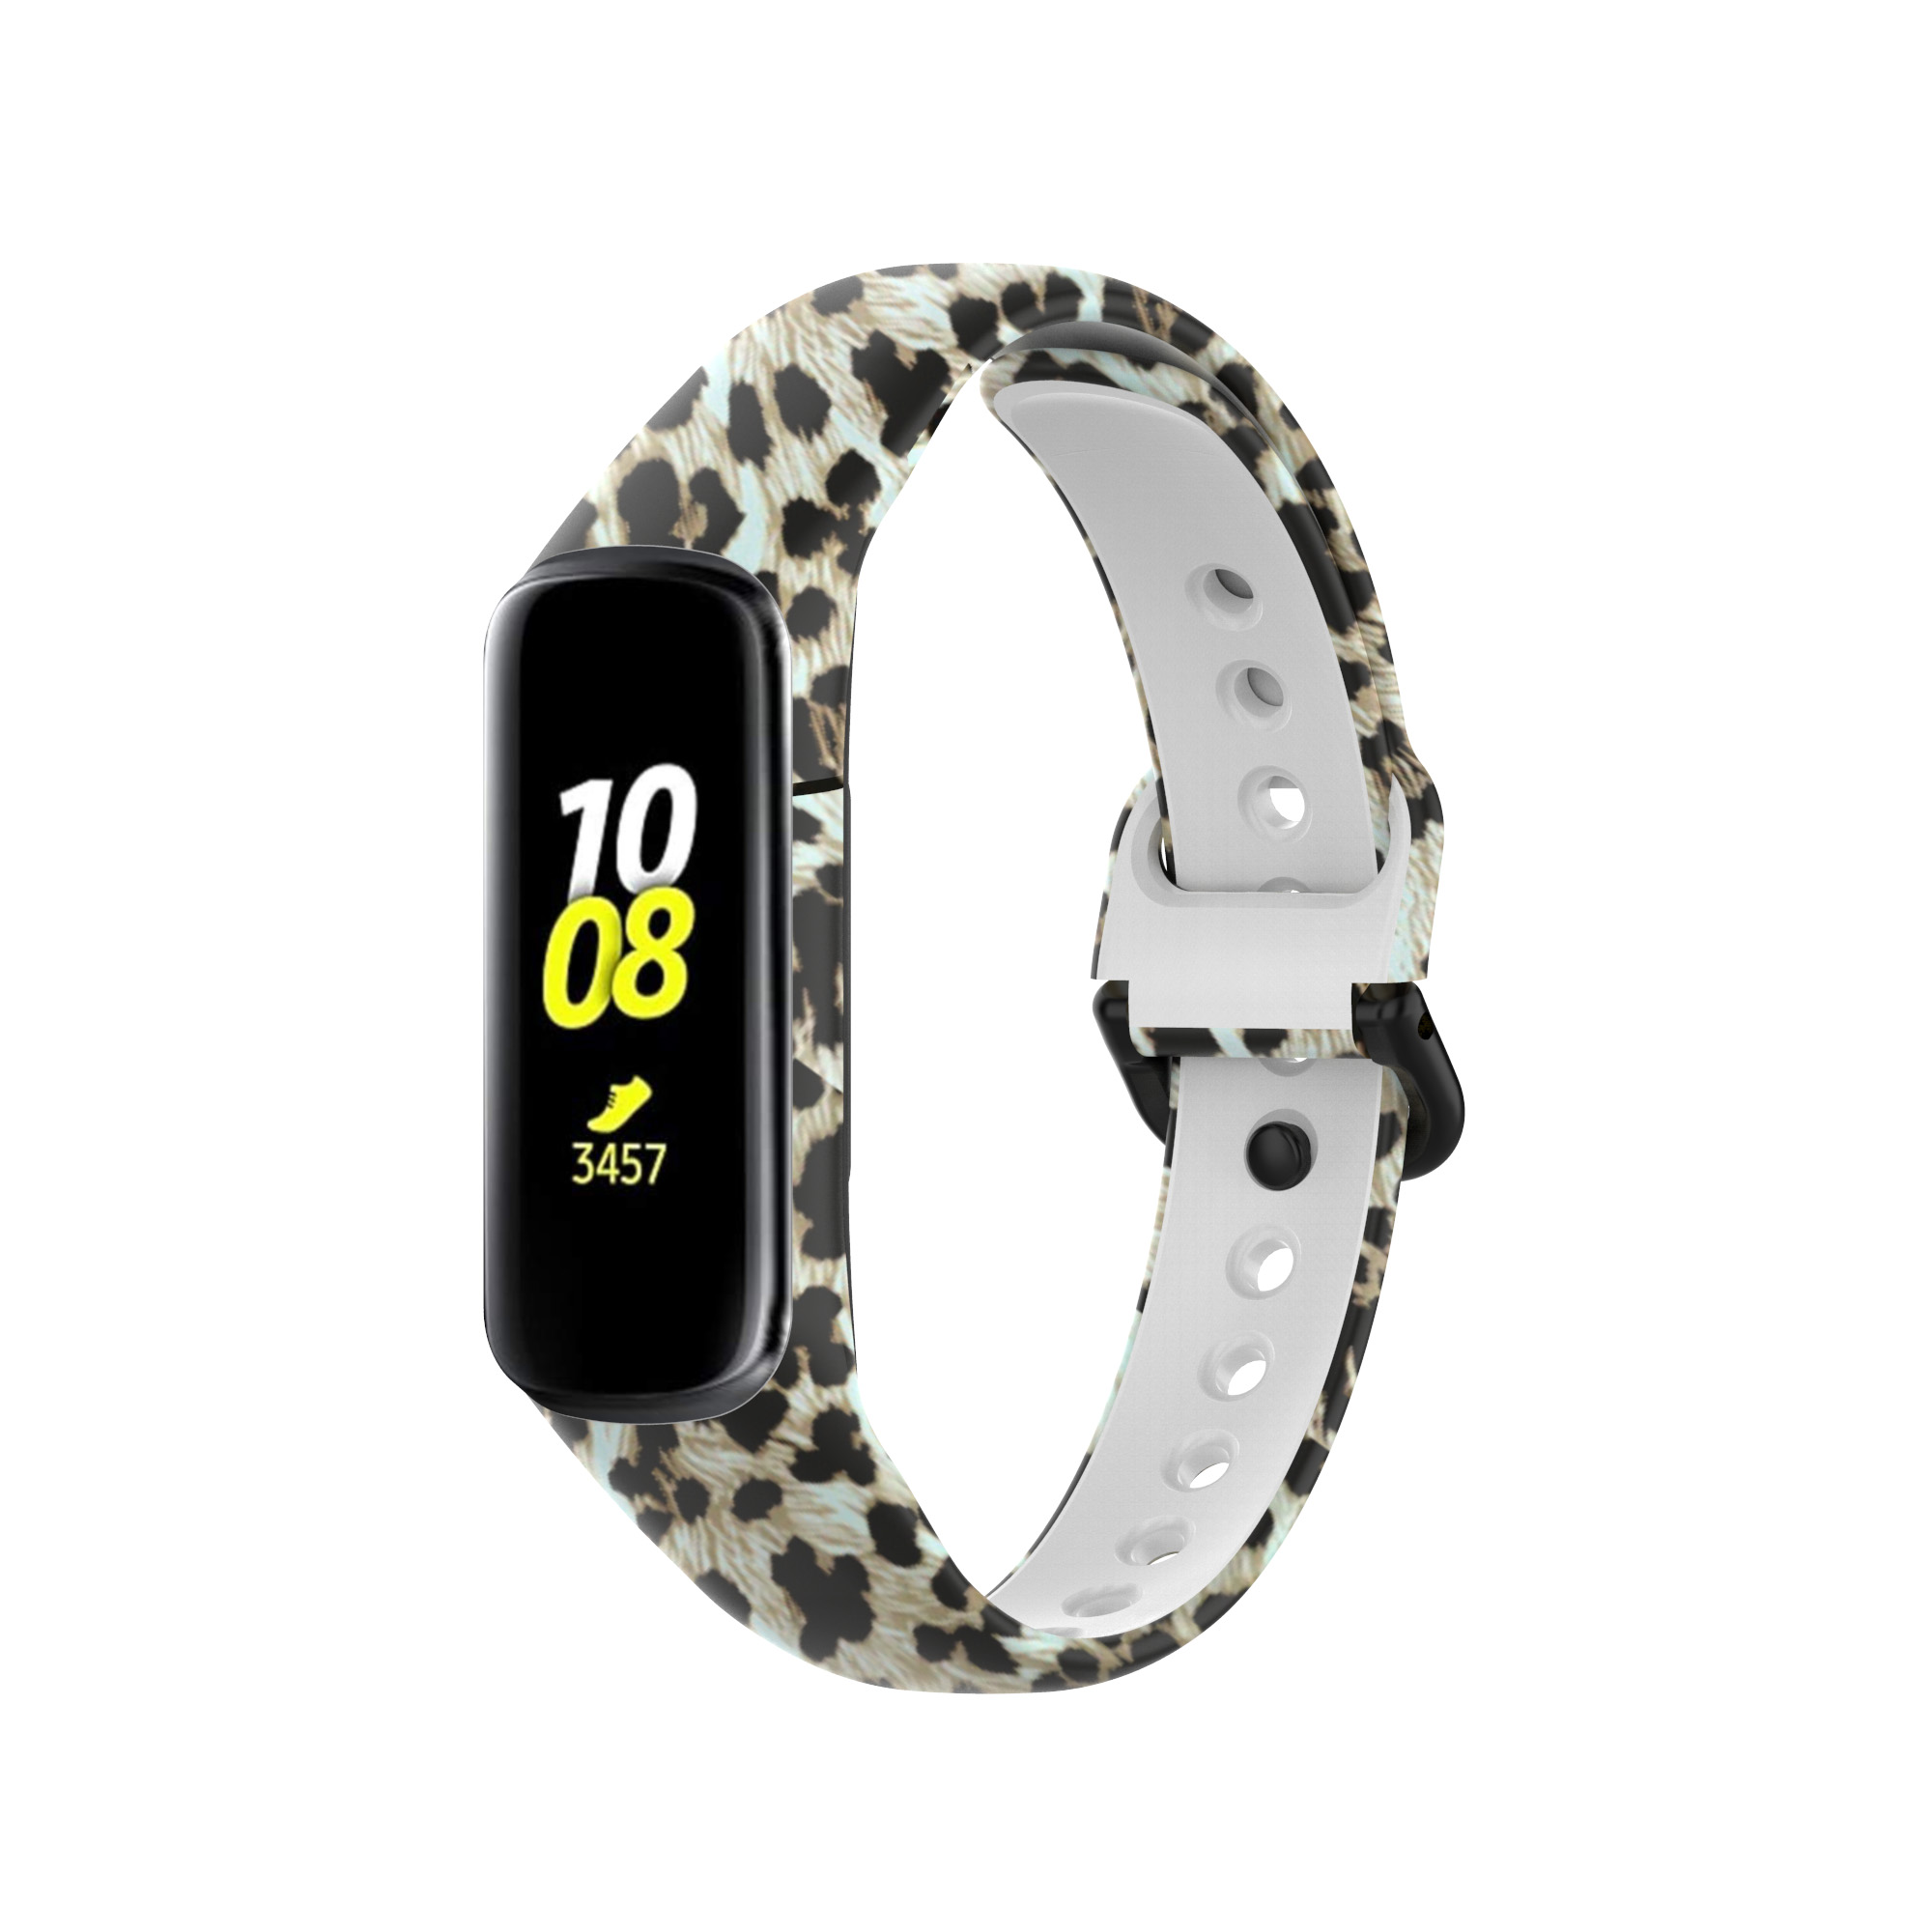 Bakeey-Printed-Pattern-Stainless-Steel-Buckle-Smart-watch-Band-Replacement-Strap-For-Samsung-Galaxy--1806217-35